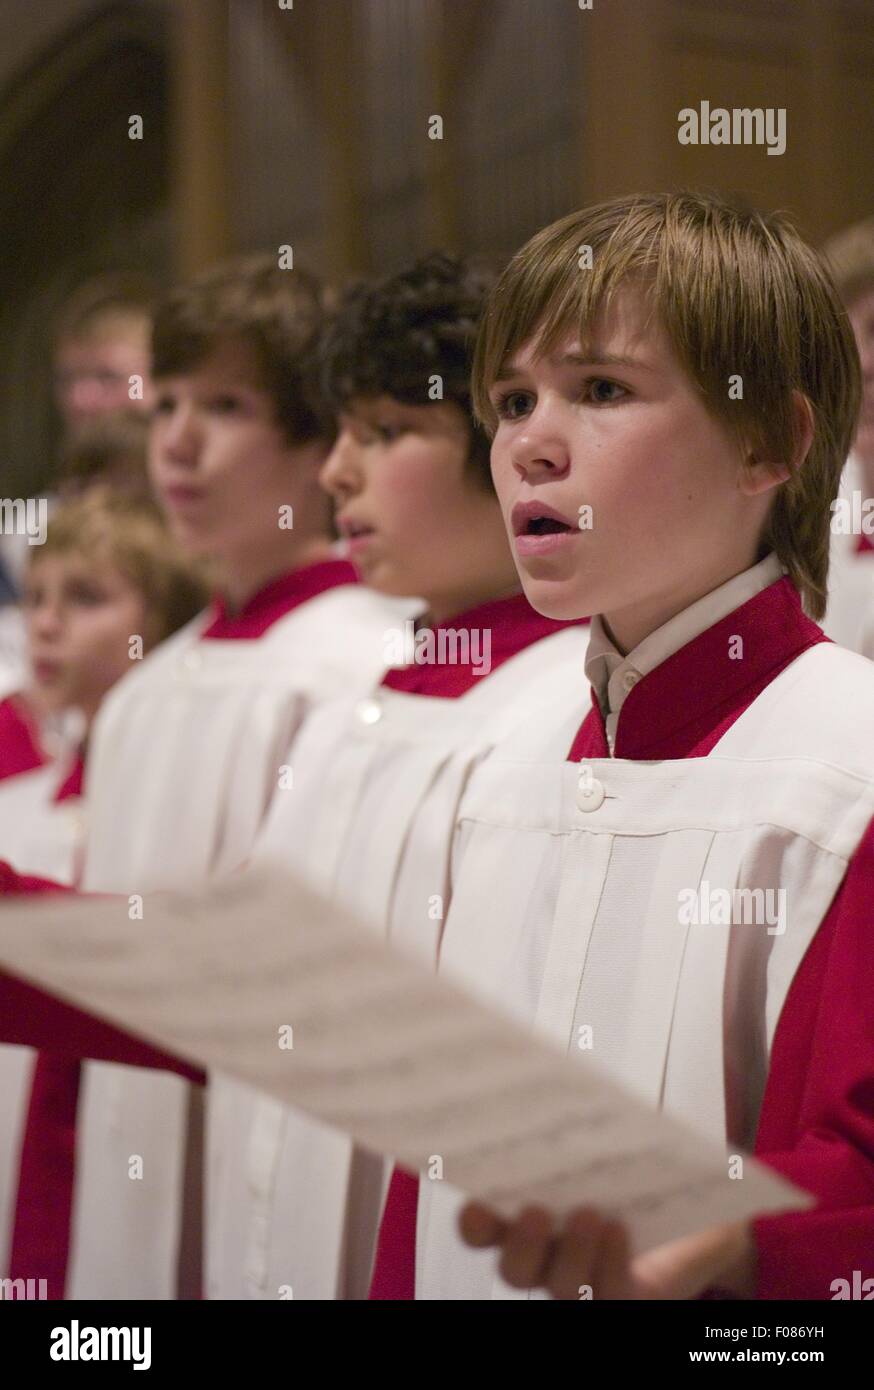 choir-boys-in-red-and-white-alter-vestments-singing-in-cathedral-F086YH.jpg